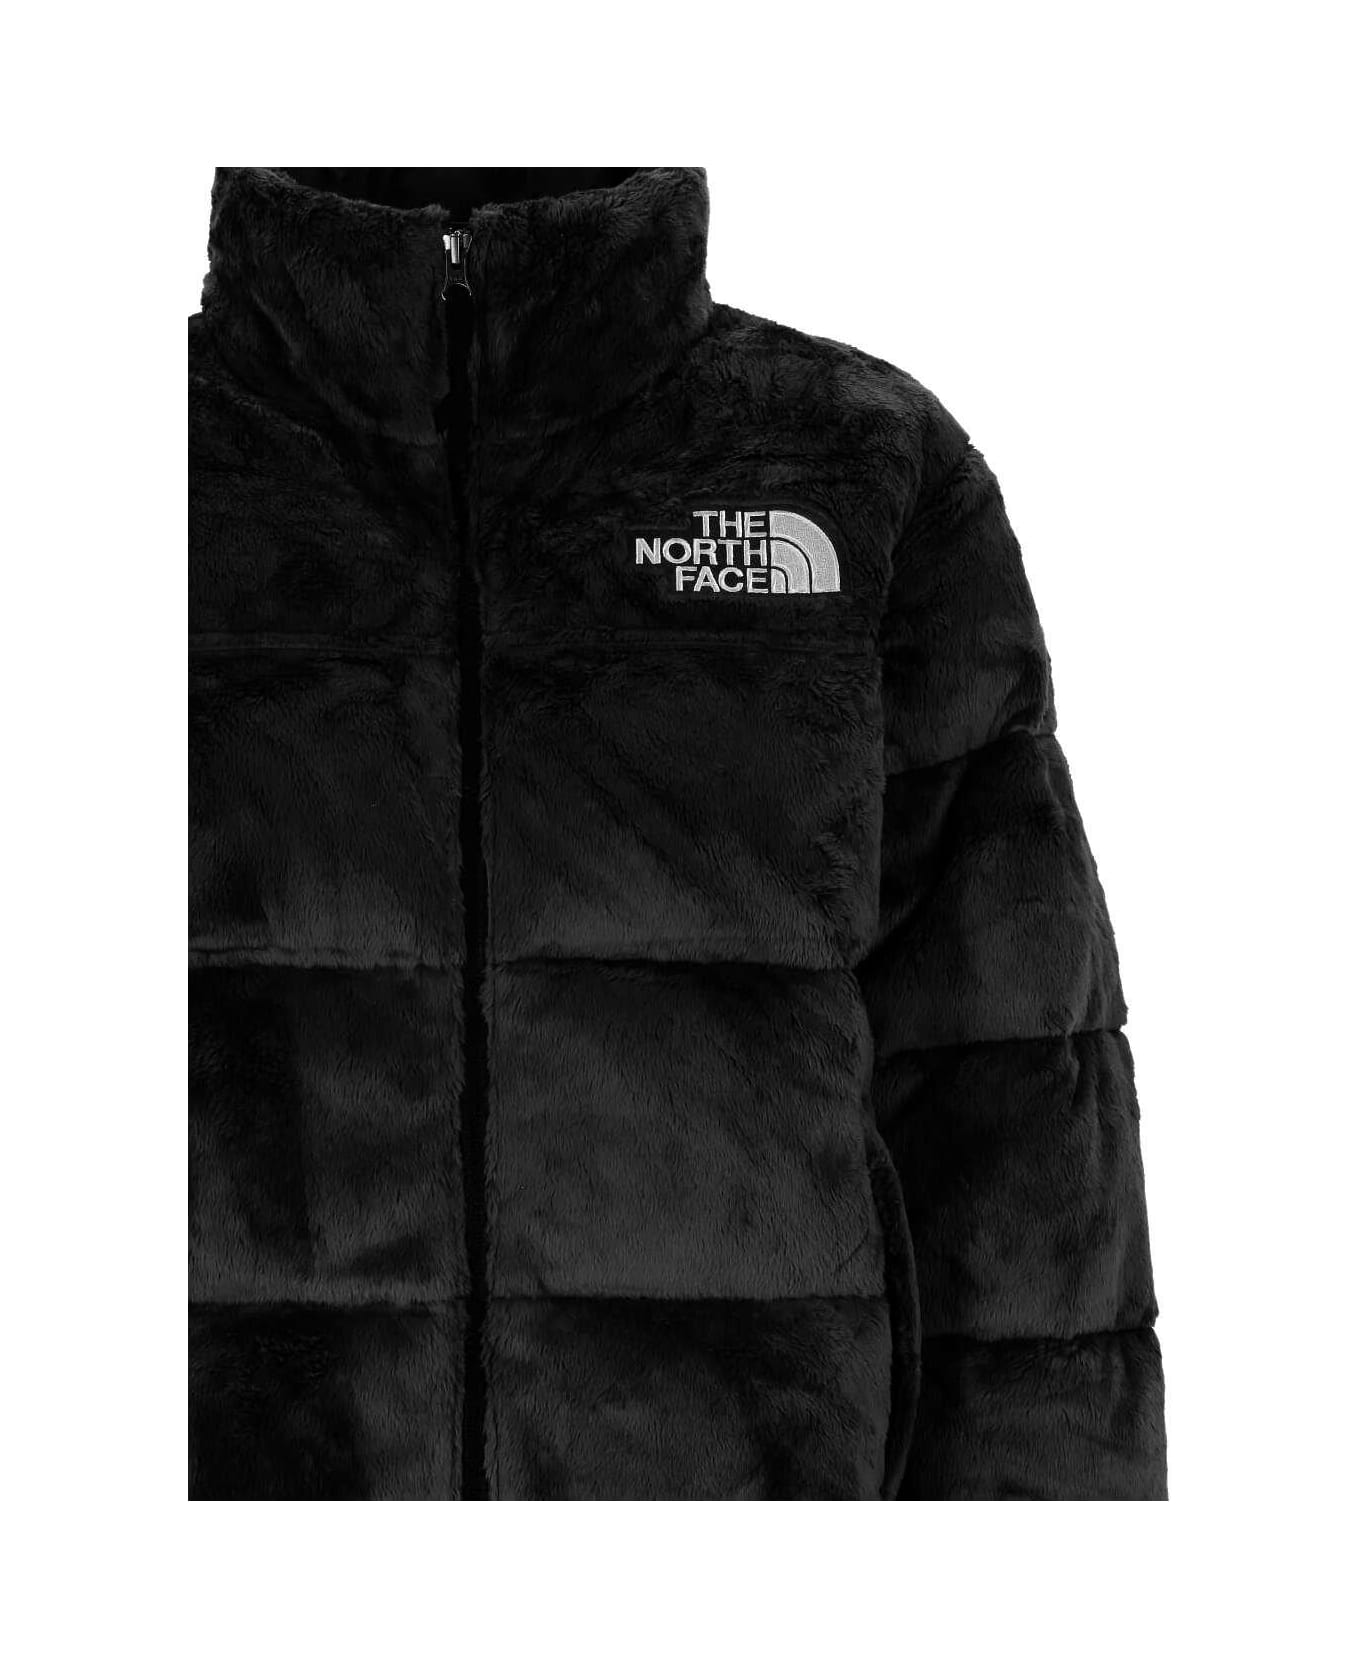 The North Face Logo Embroidered Funnel-neck Jacket - Black